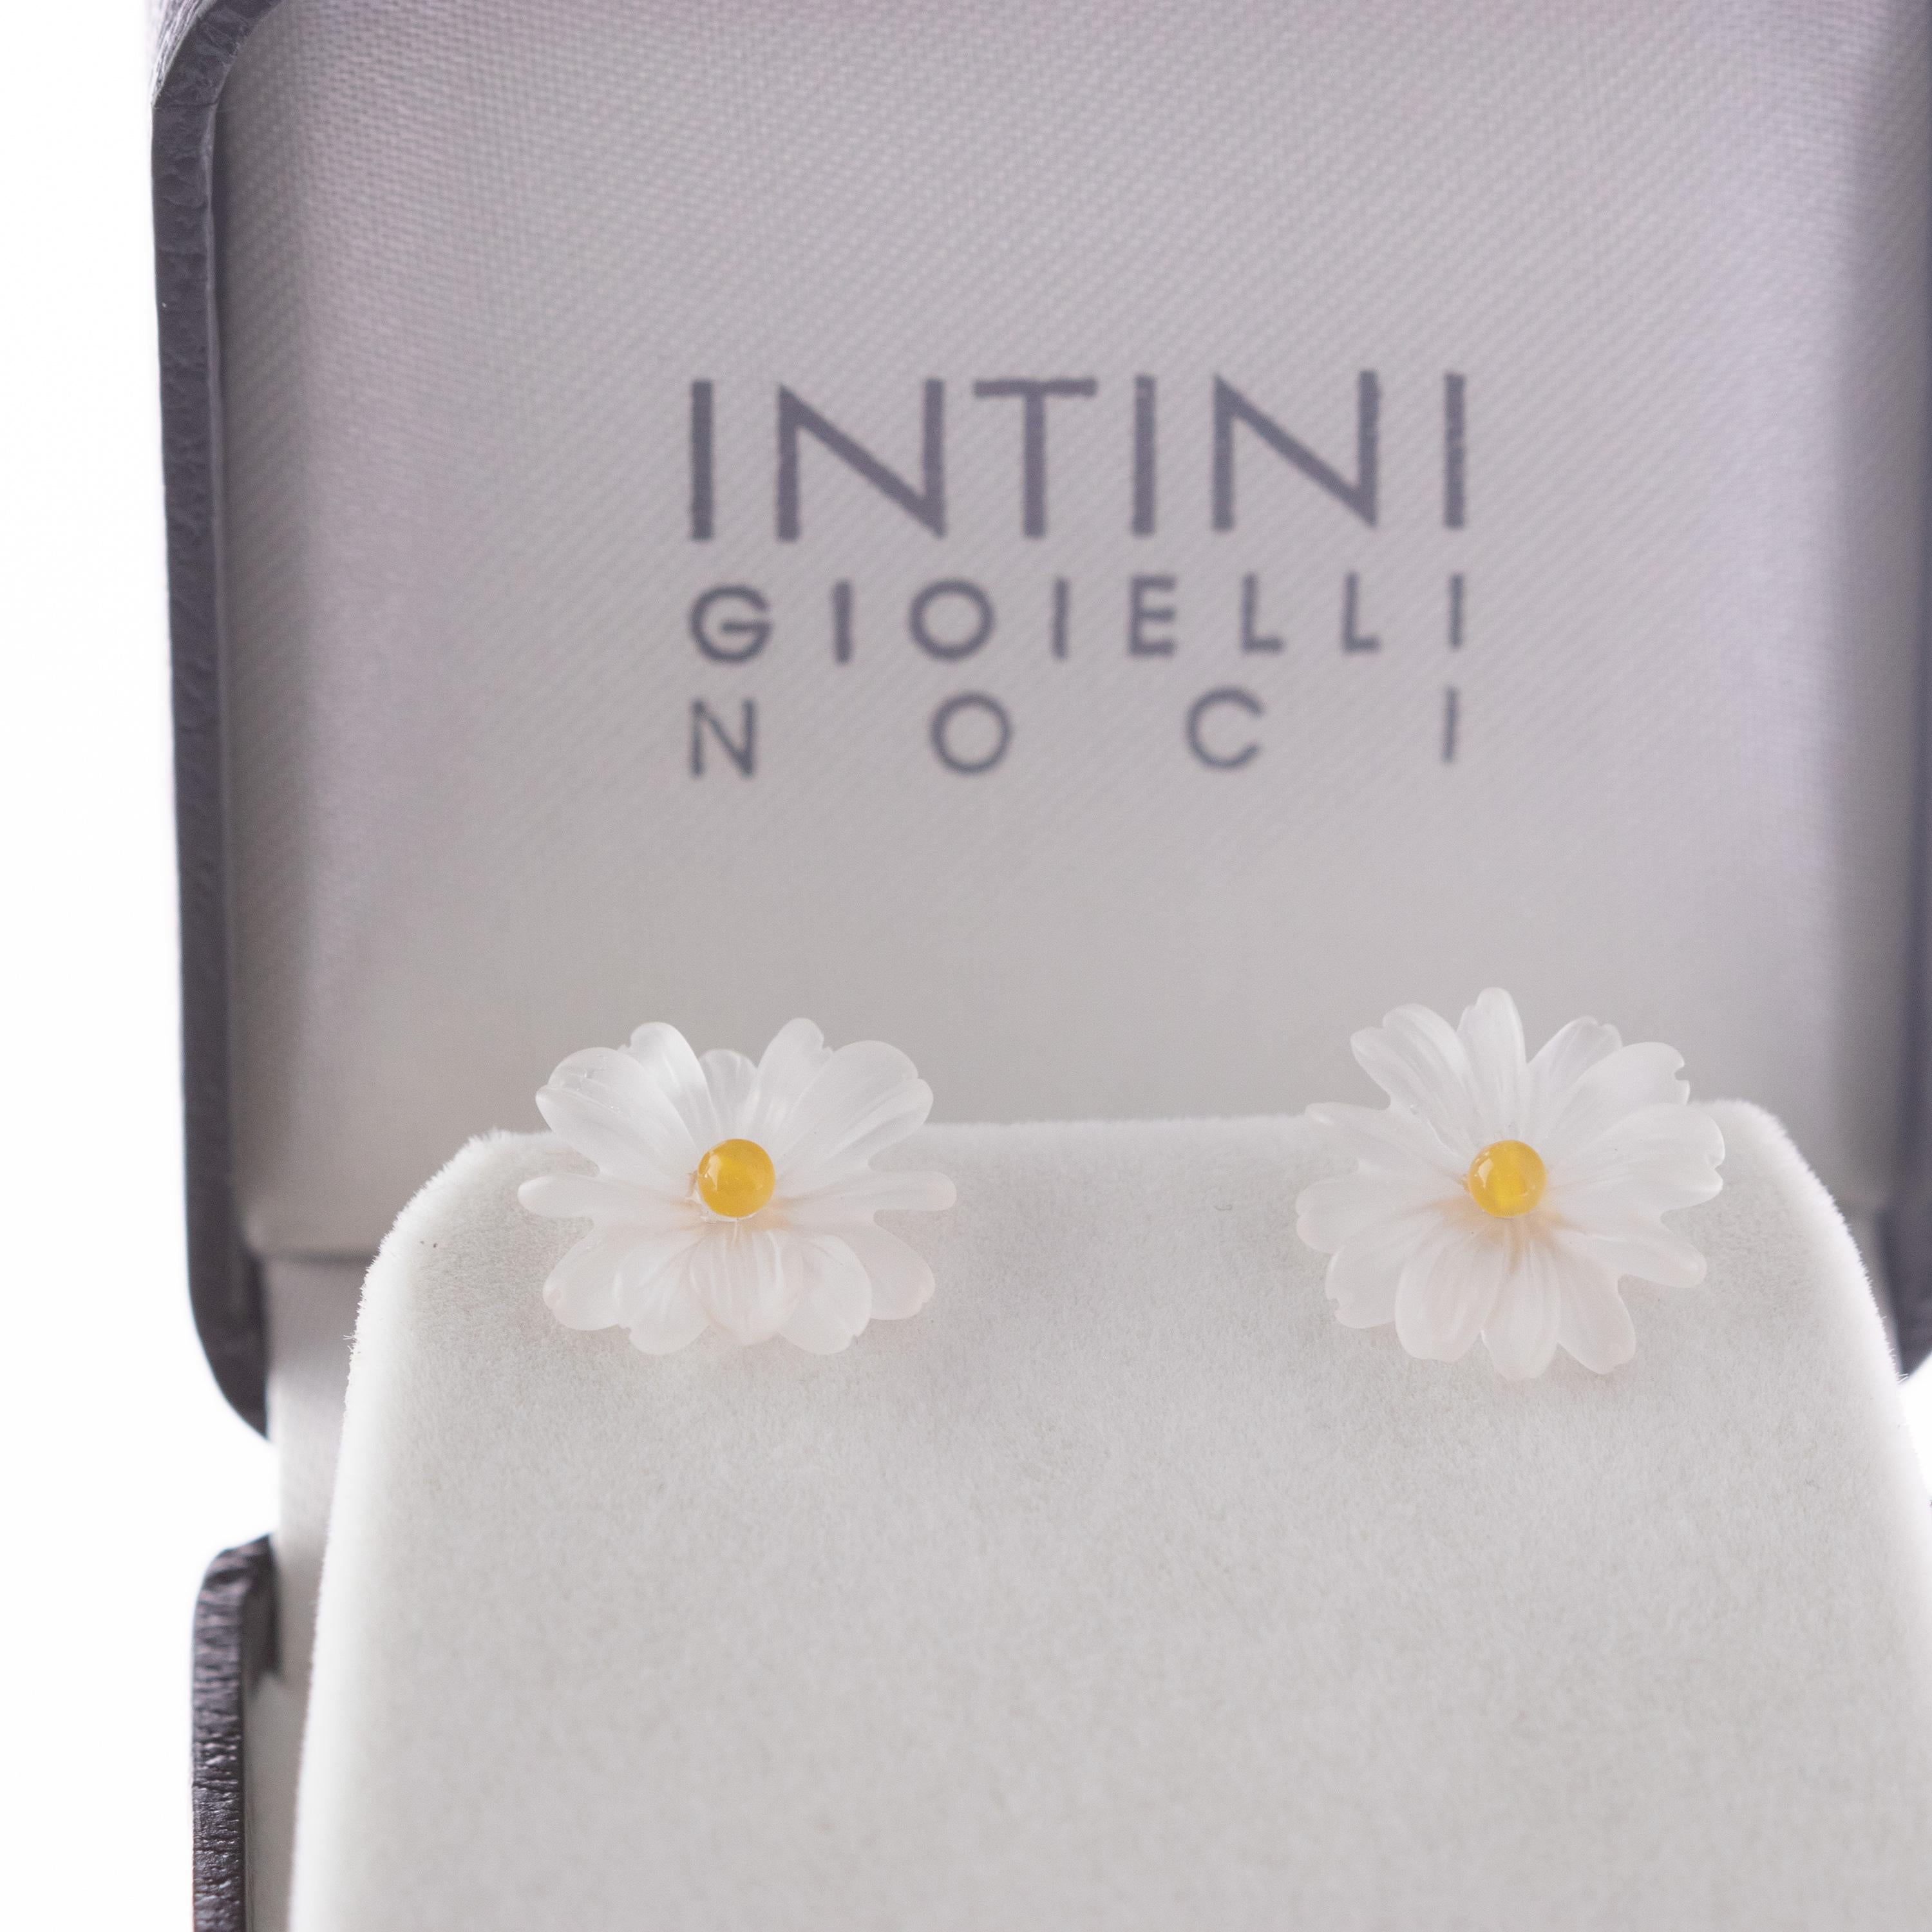 Astonishing and delicate 5.5 ct rock crystal flower. Stud earrings with a small yellow agate bead in the middle. Carved petals that evoke the italian handmade traditional jewelry work, wrapping itself in a soft look enriched with 9 karat yellow gold